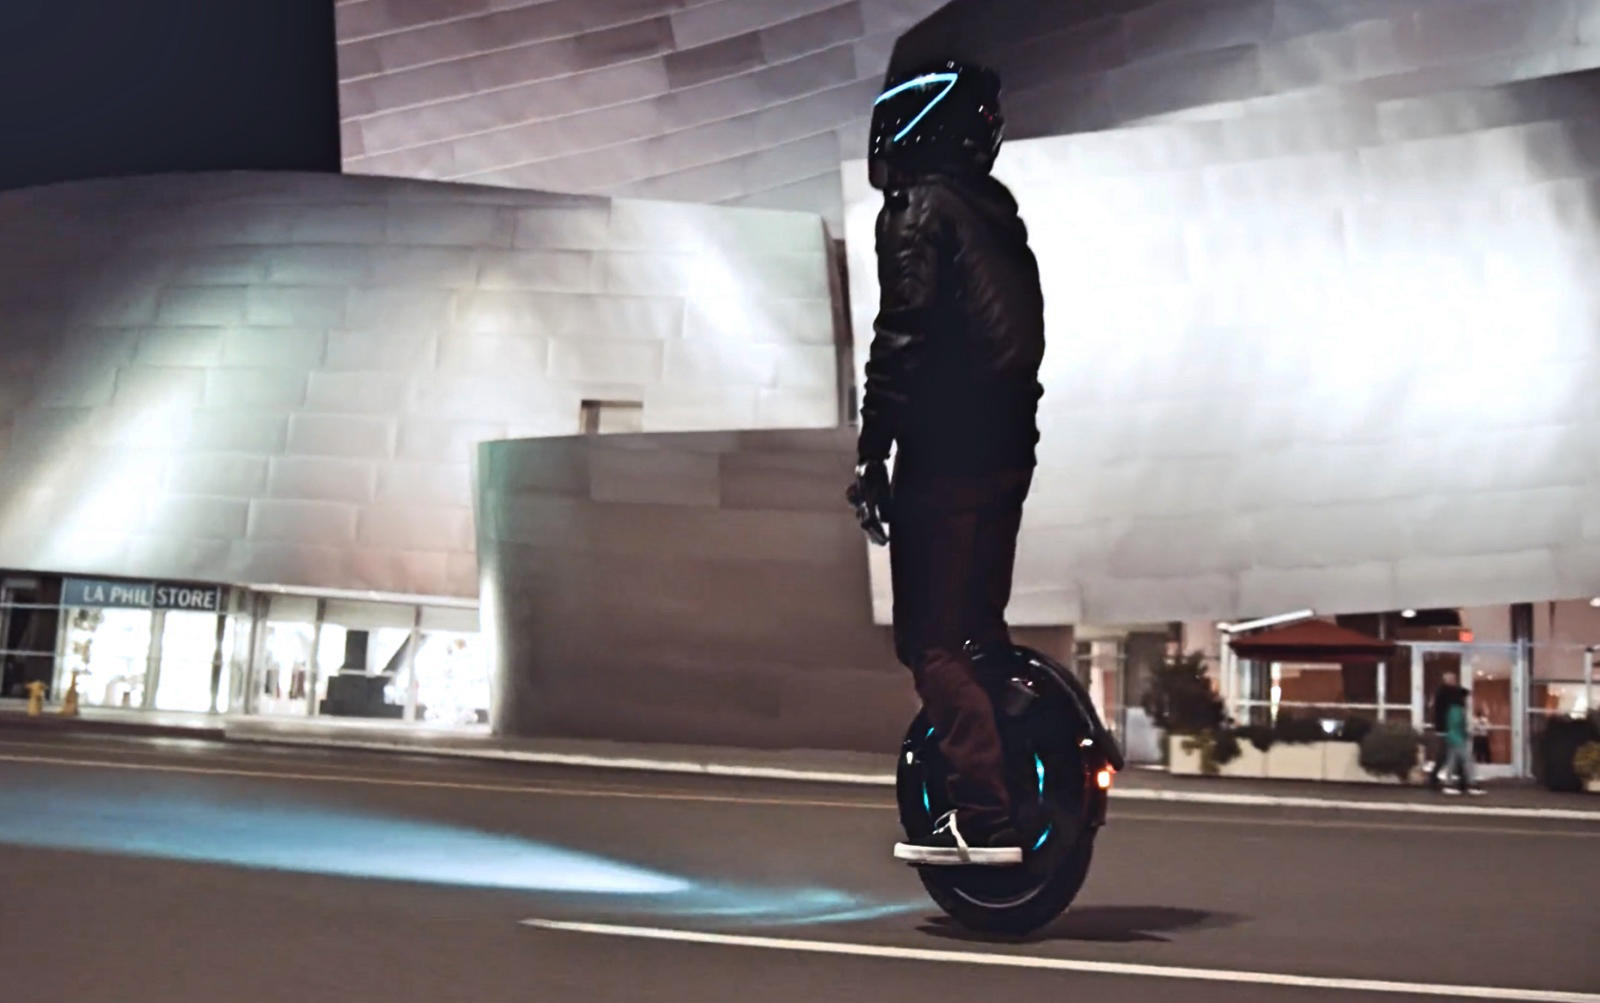 inmotion-v10-electric-unicycle-solowheel-personal-vehicle_downtown-night